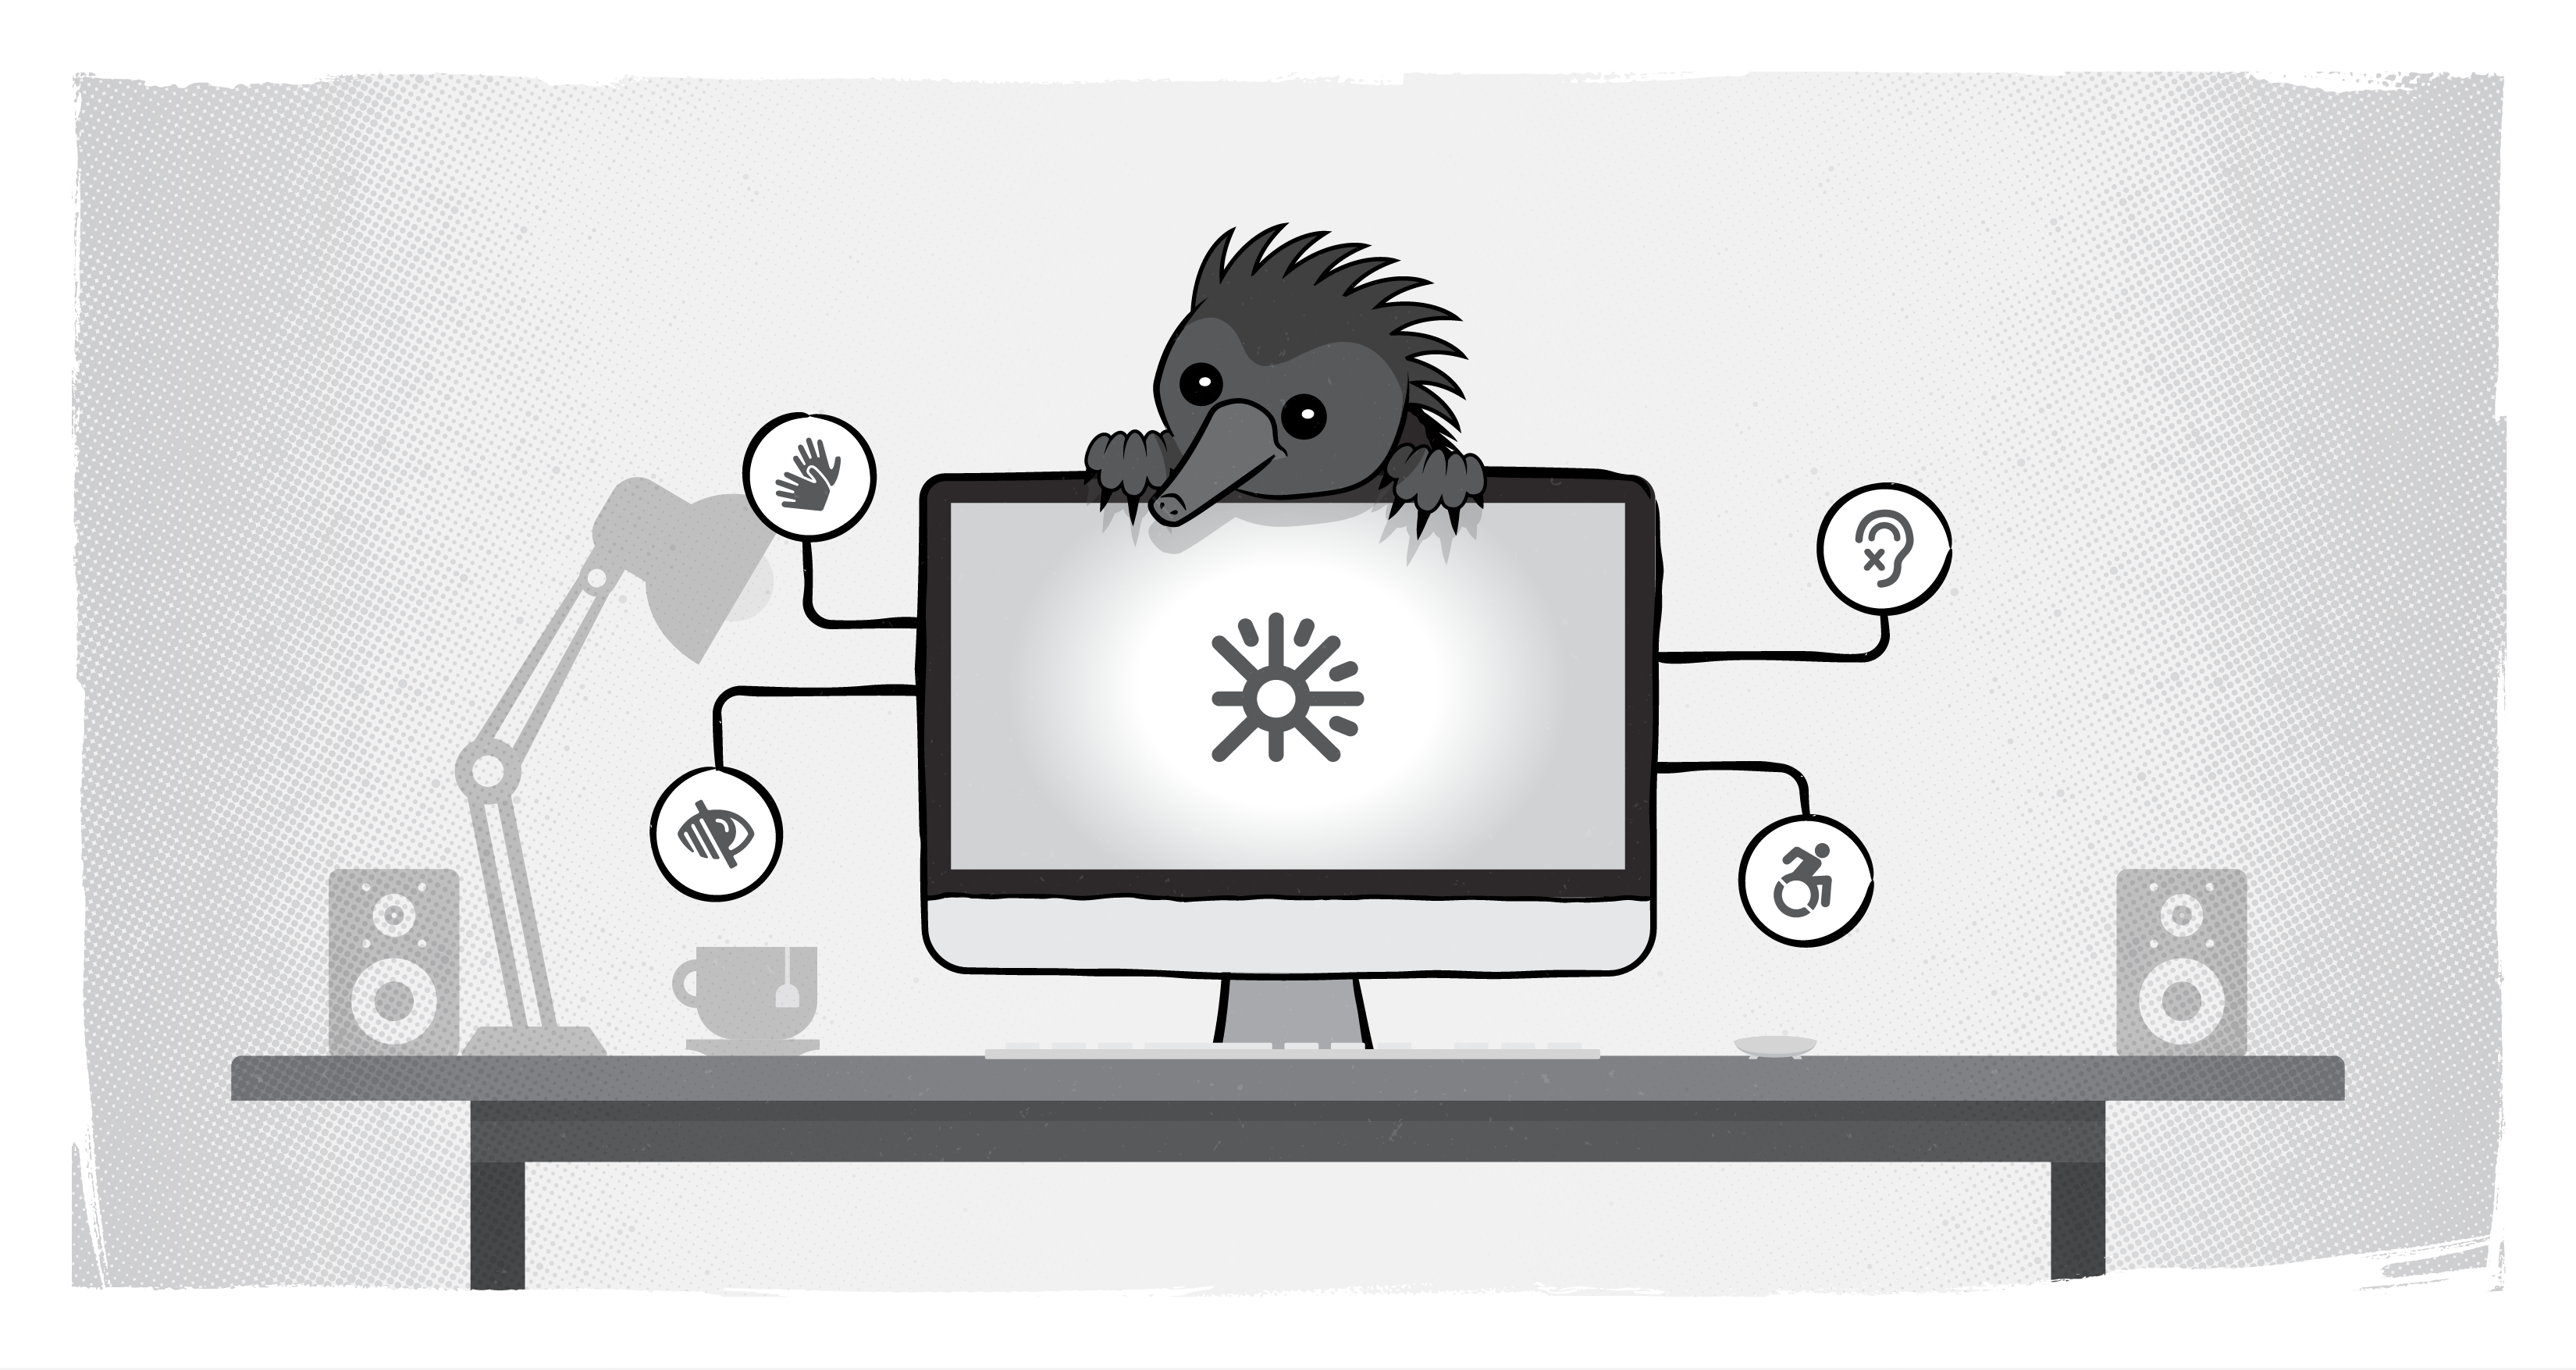 echidna perched over computer screen showing icons for deaf, low vision